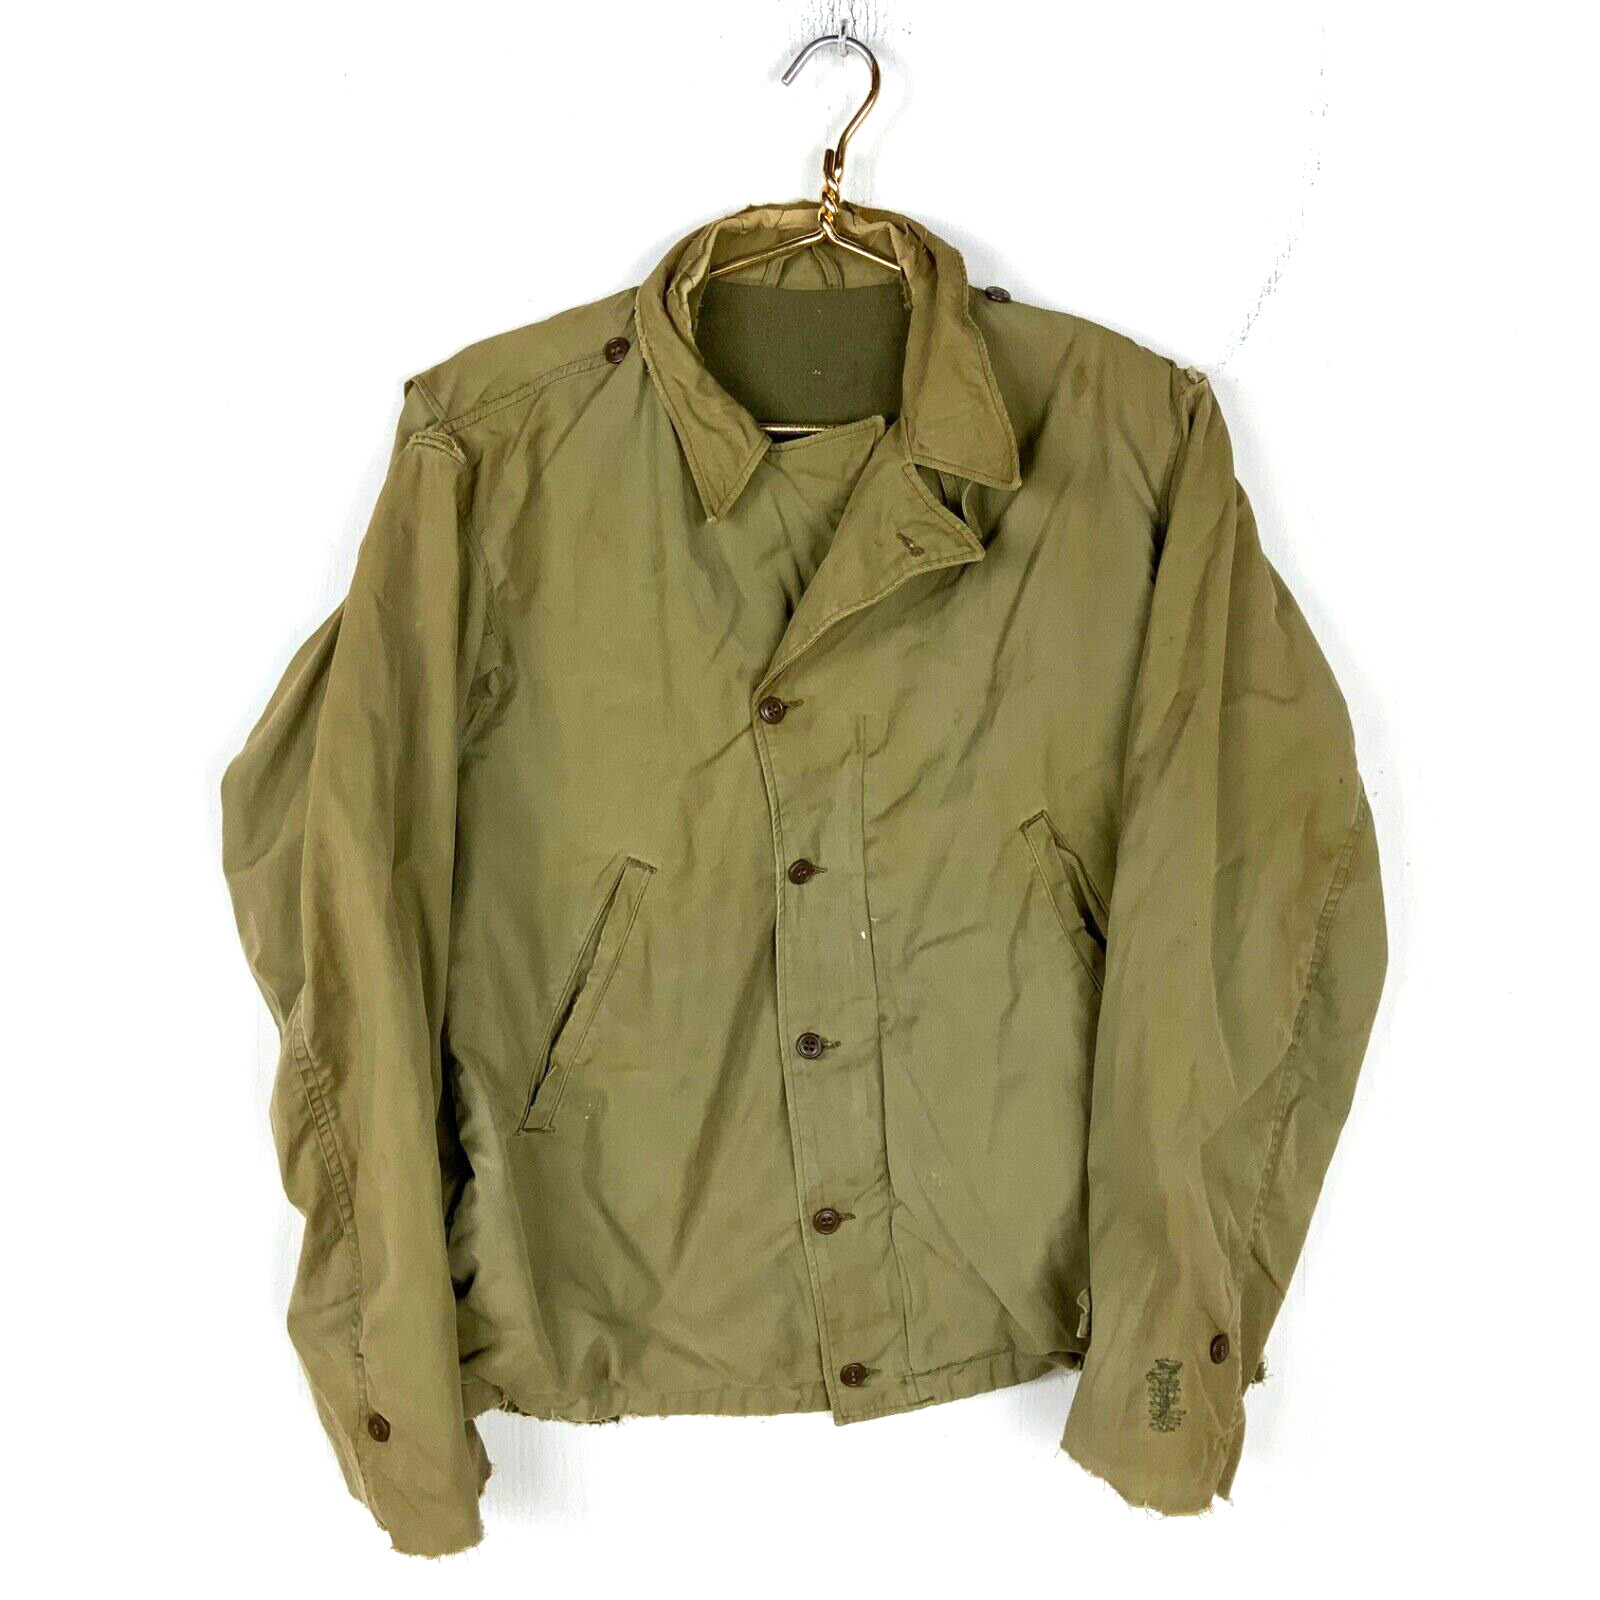 Vintage Us Military Button Up Jacket Size Medium Green 40s